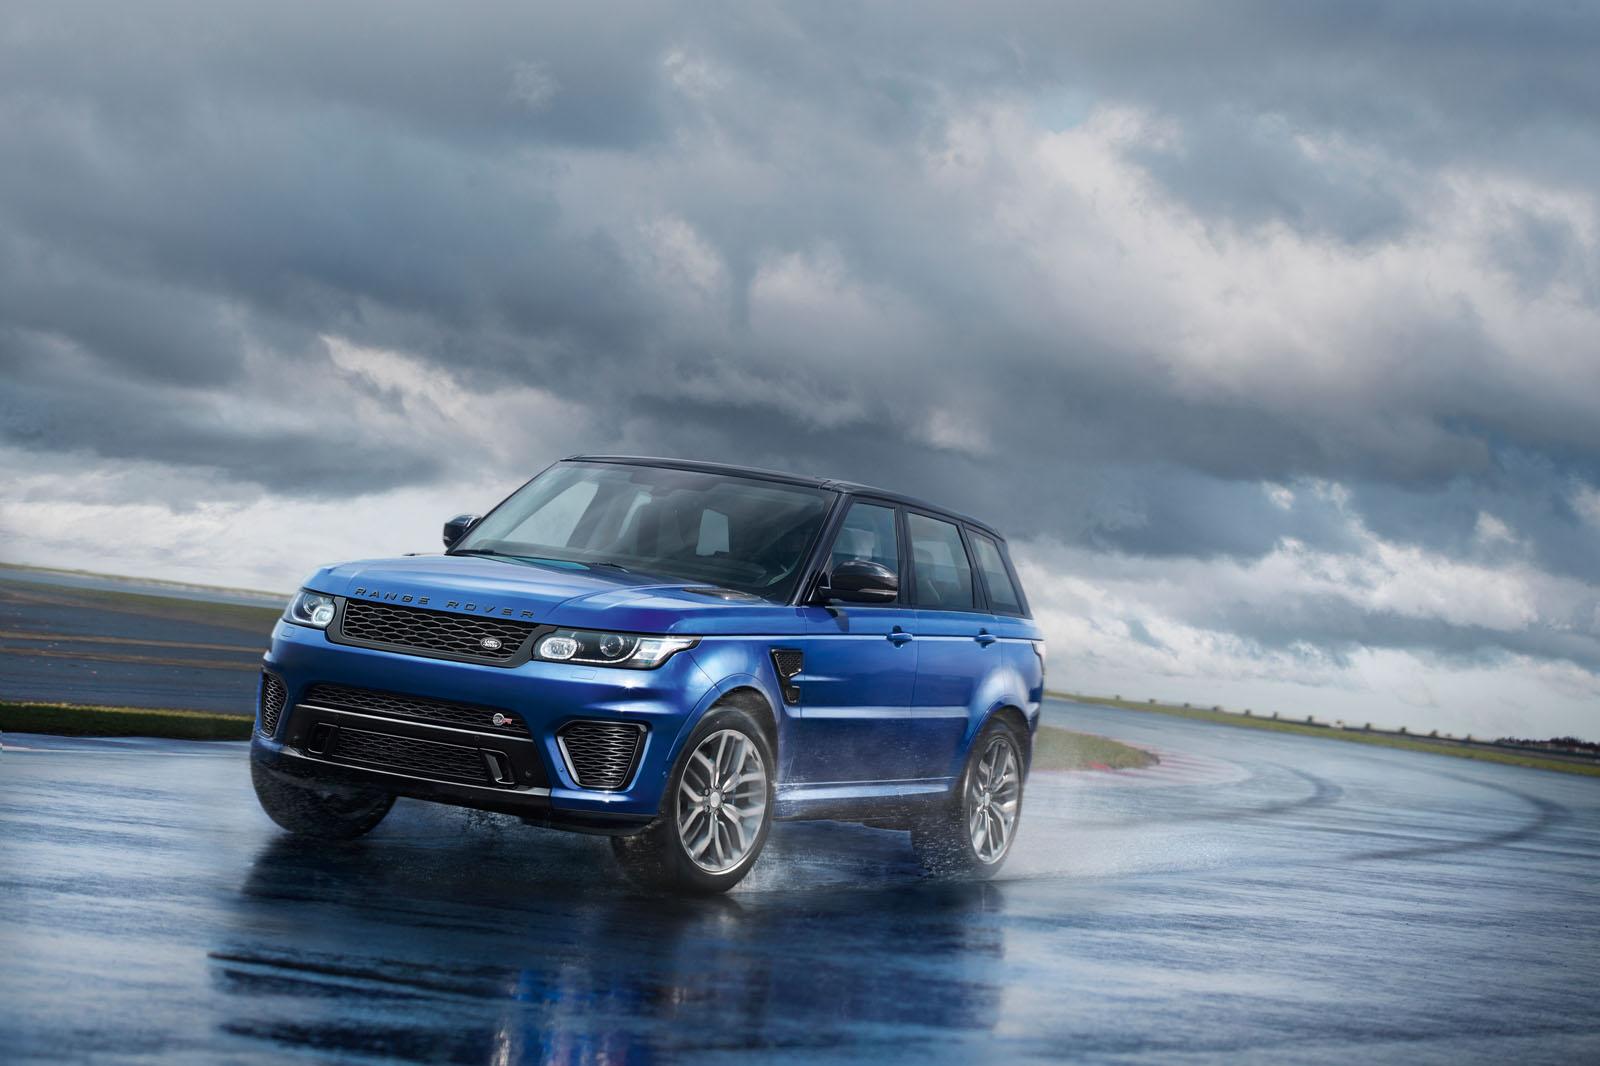 Watch The Range Rover Sport Svr Scorch The Silverstone Track